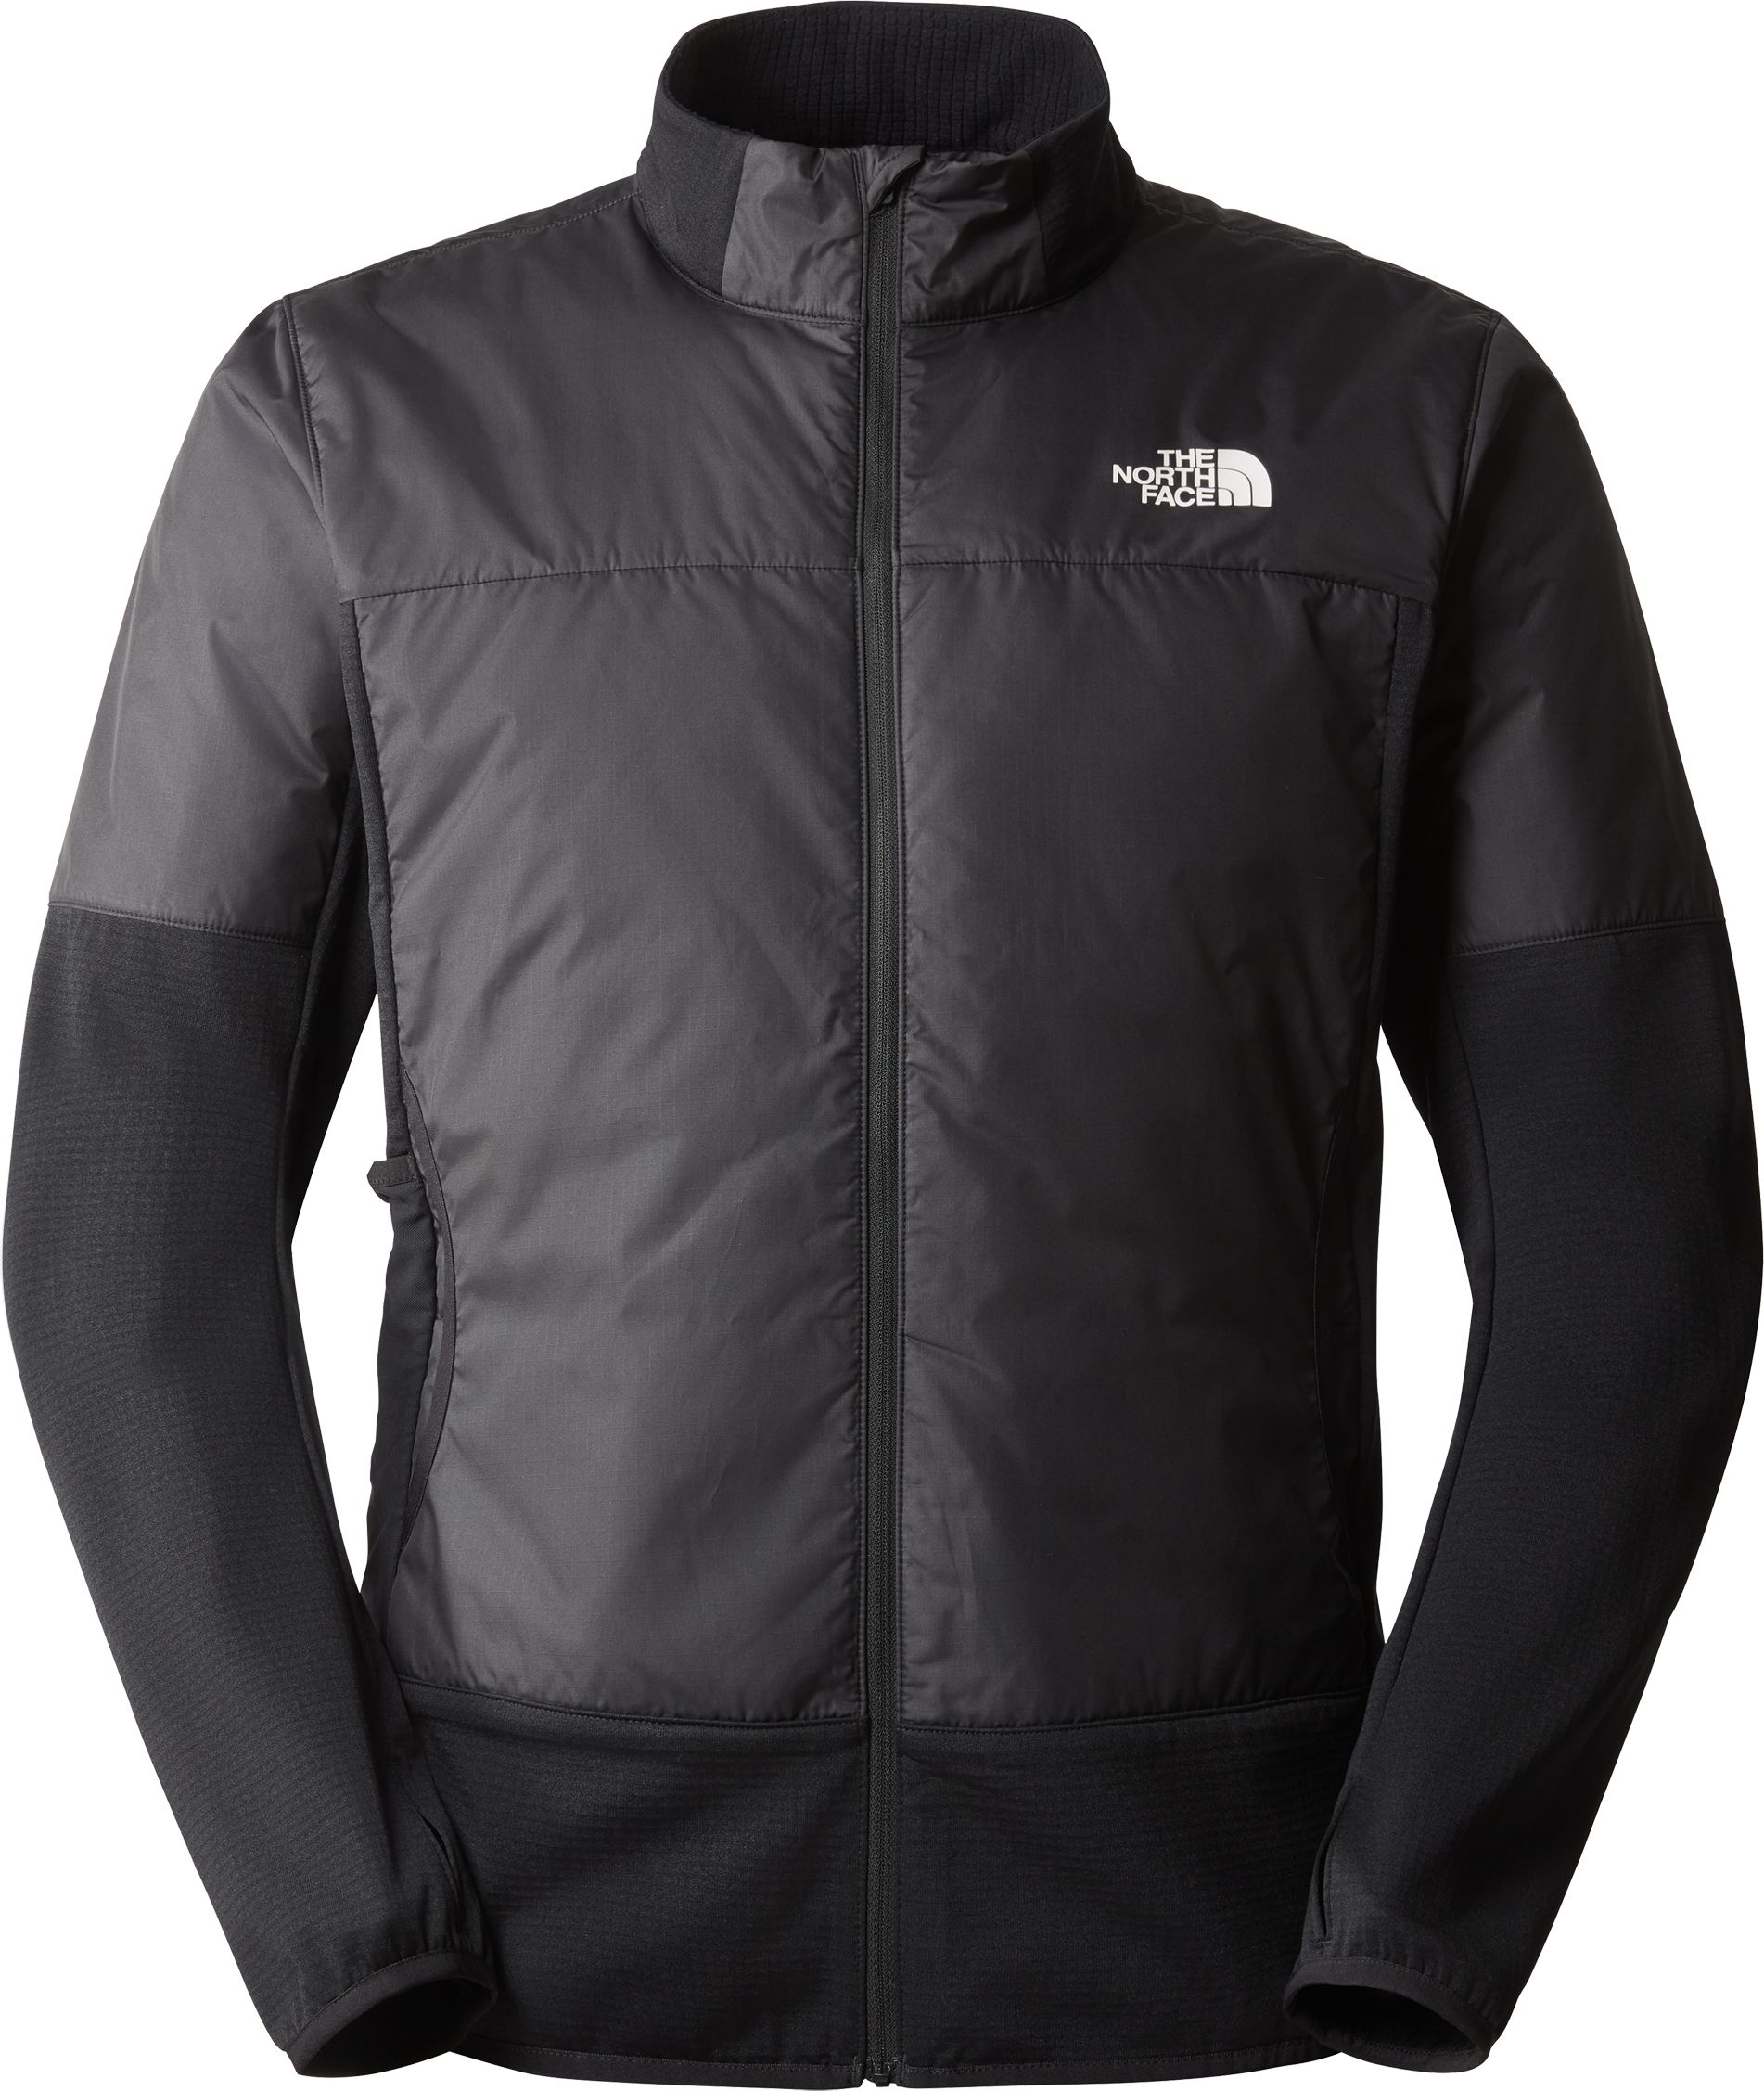 THE NORTH FACE, M WINTER WARM PRO JACKET